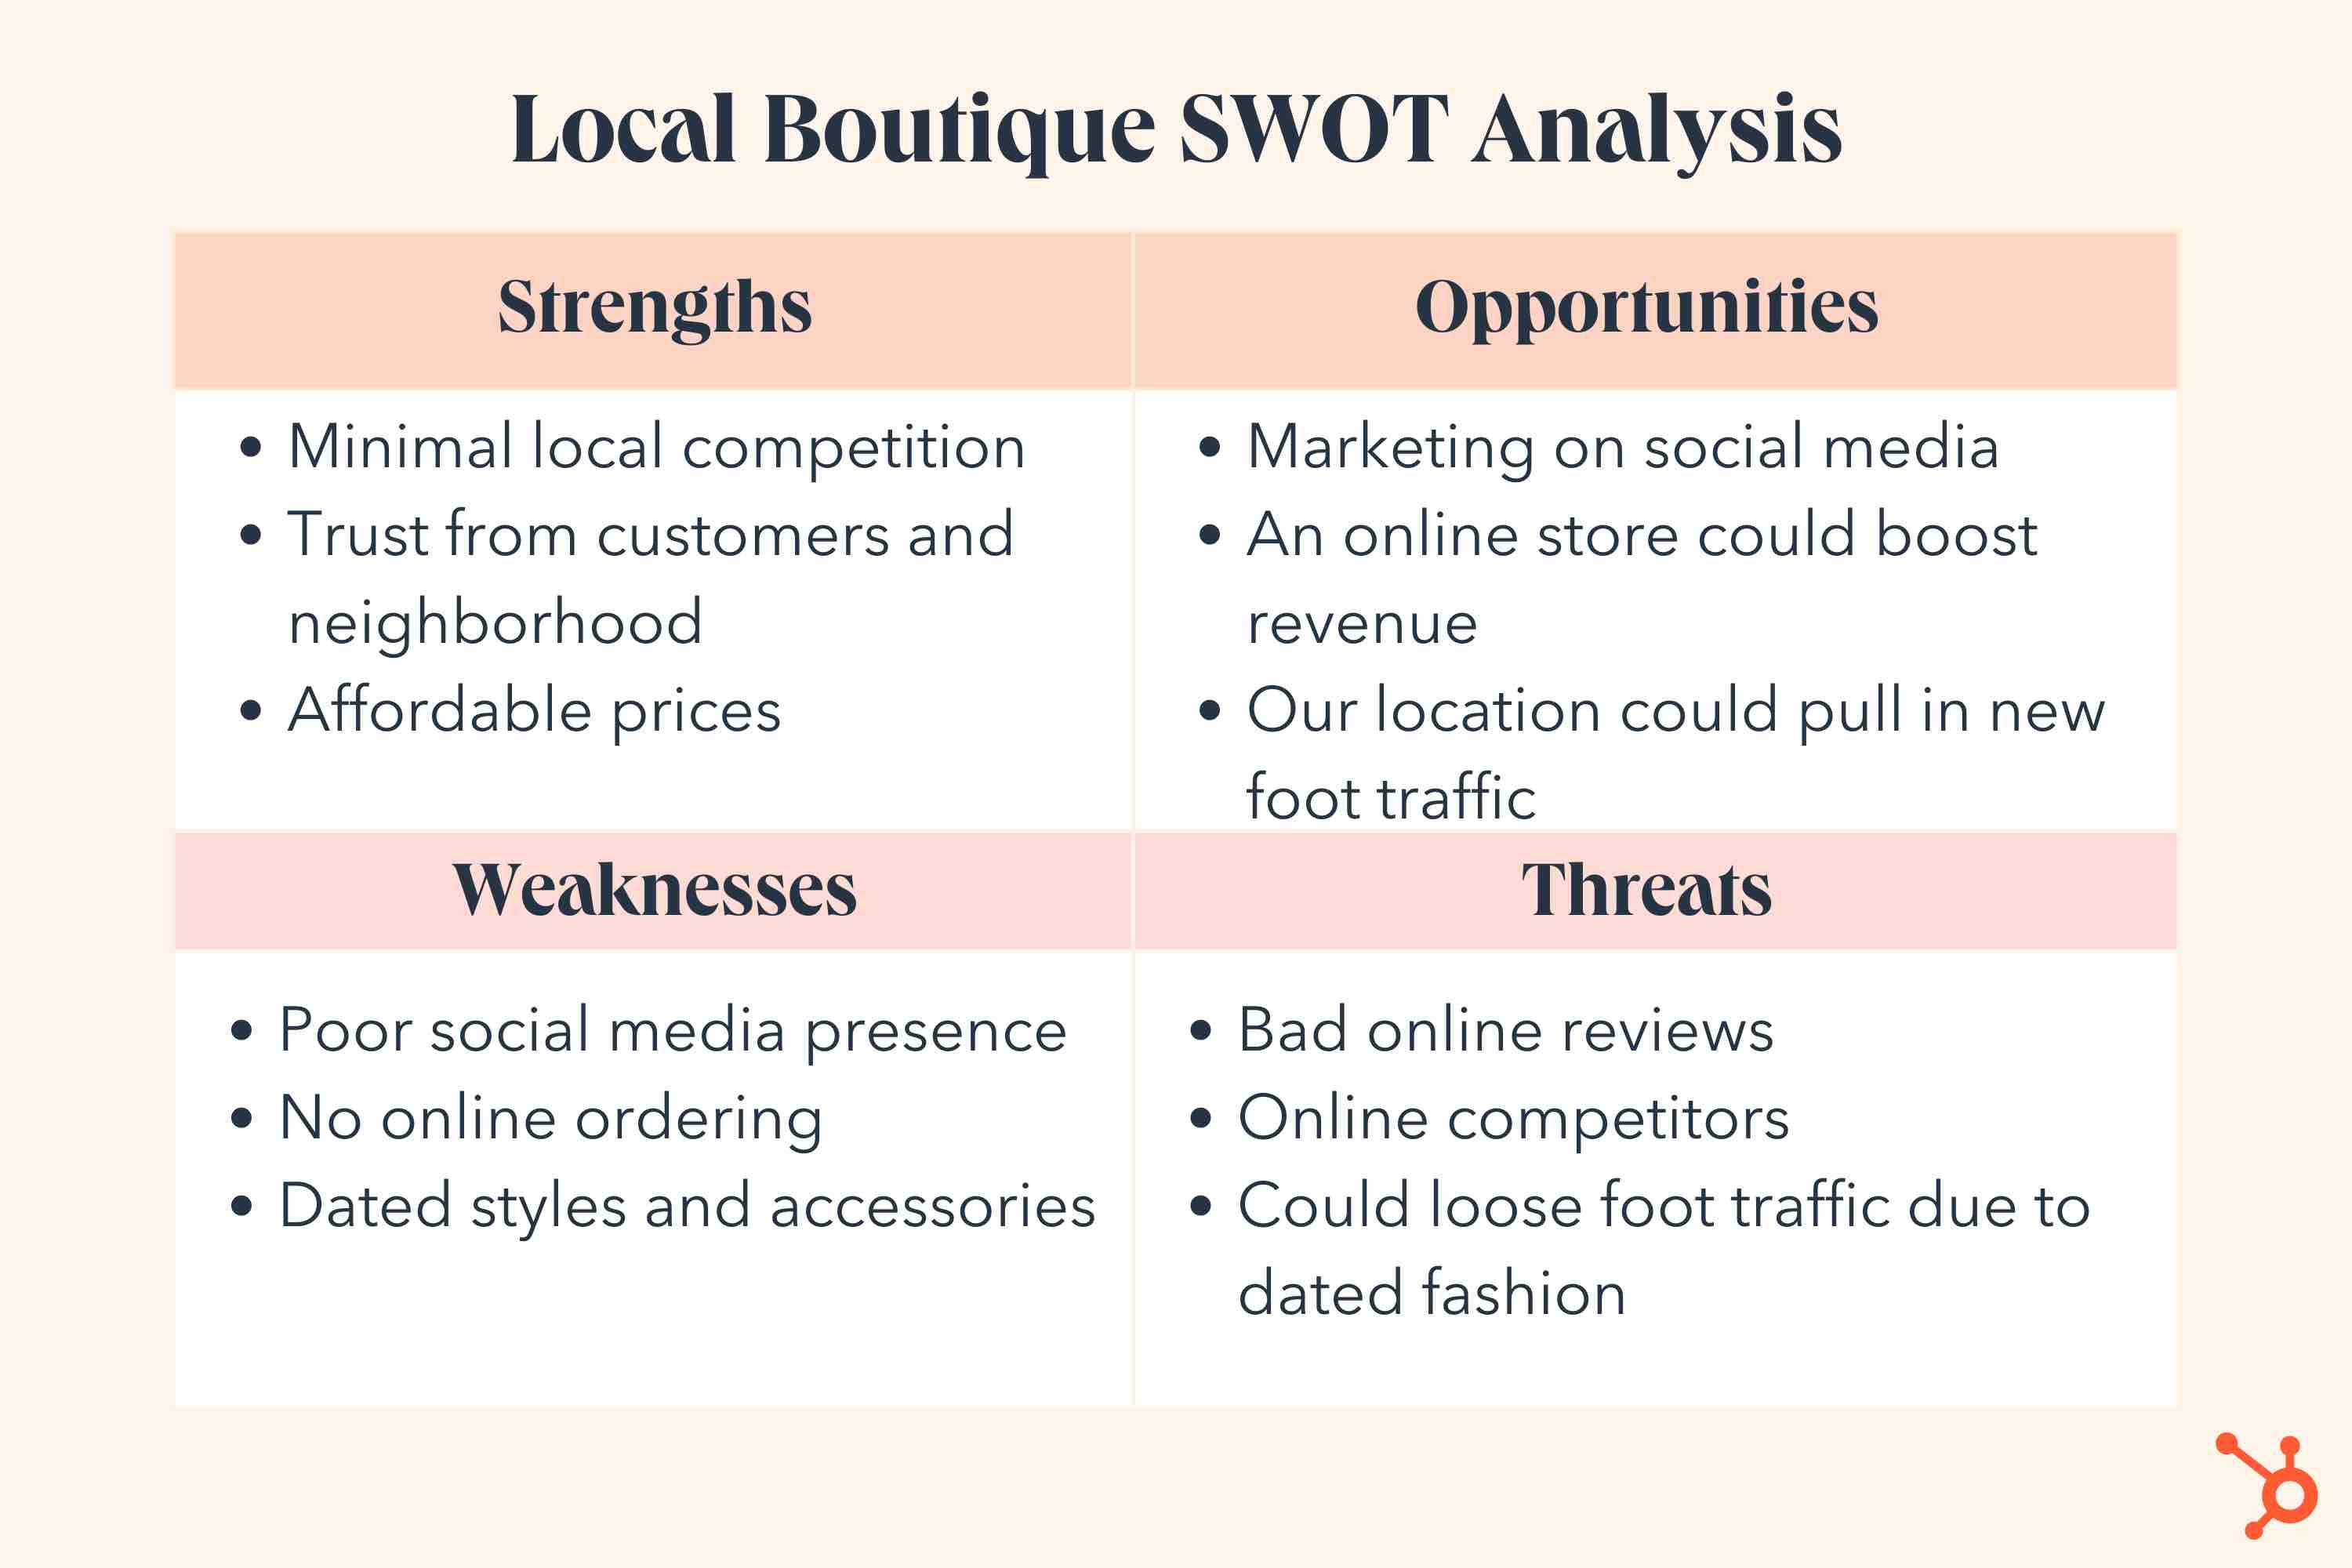 A SWOT analysis example for a local boutique.